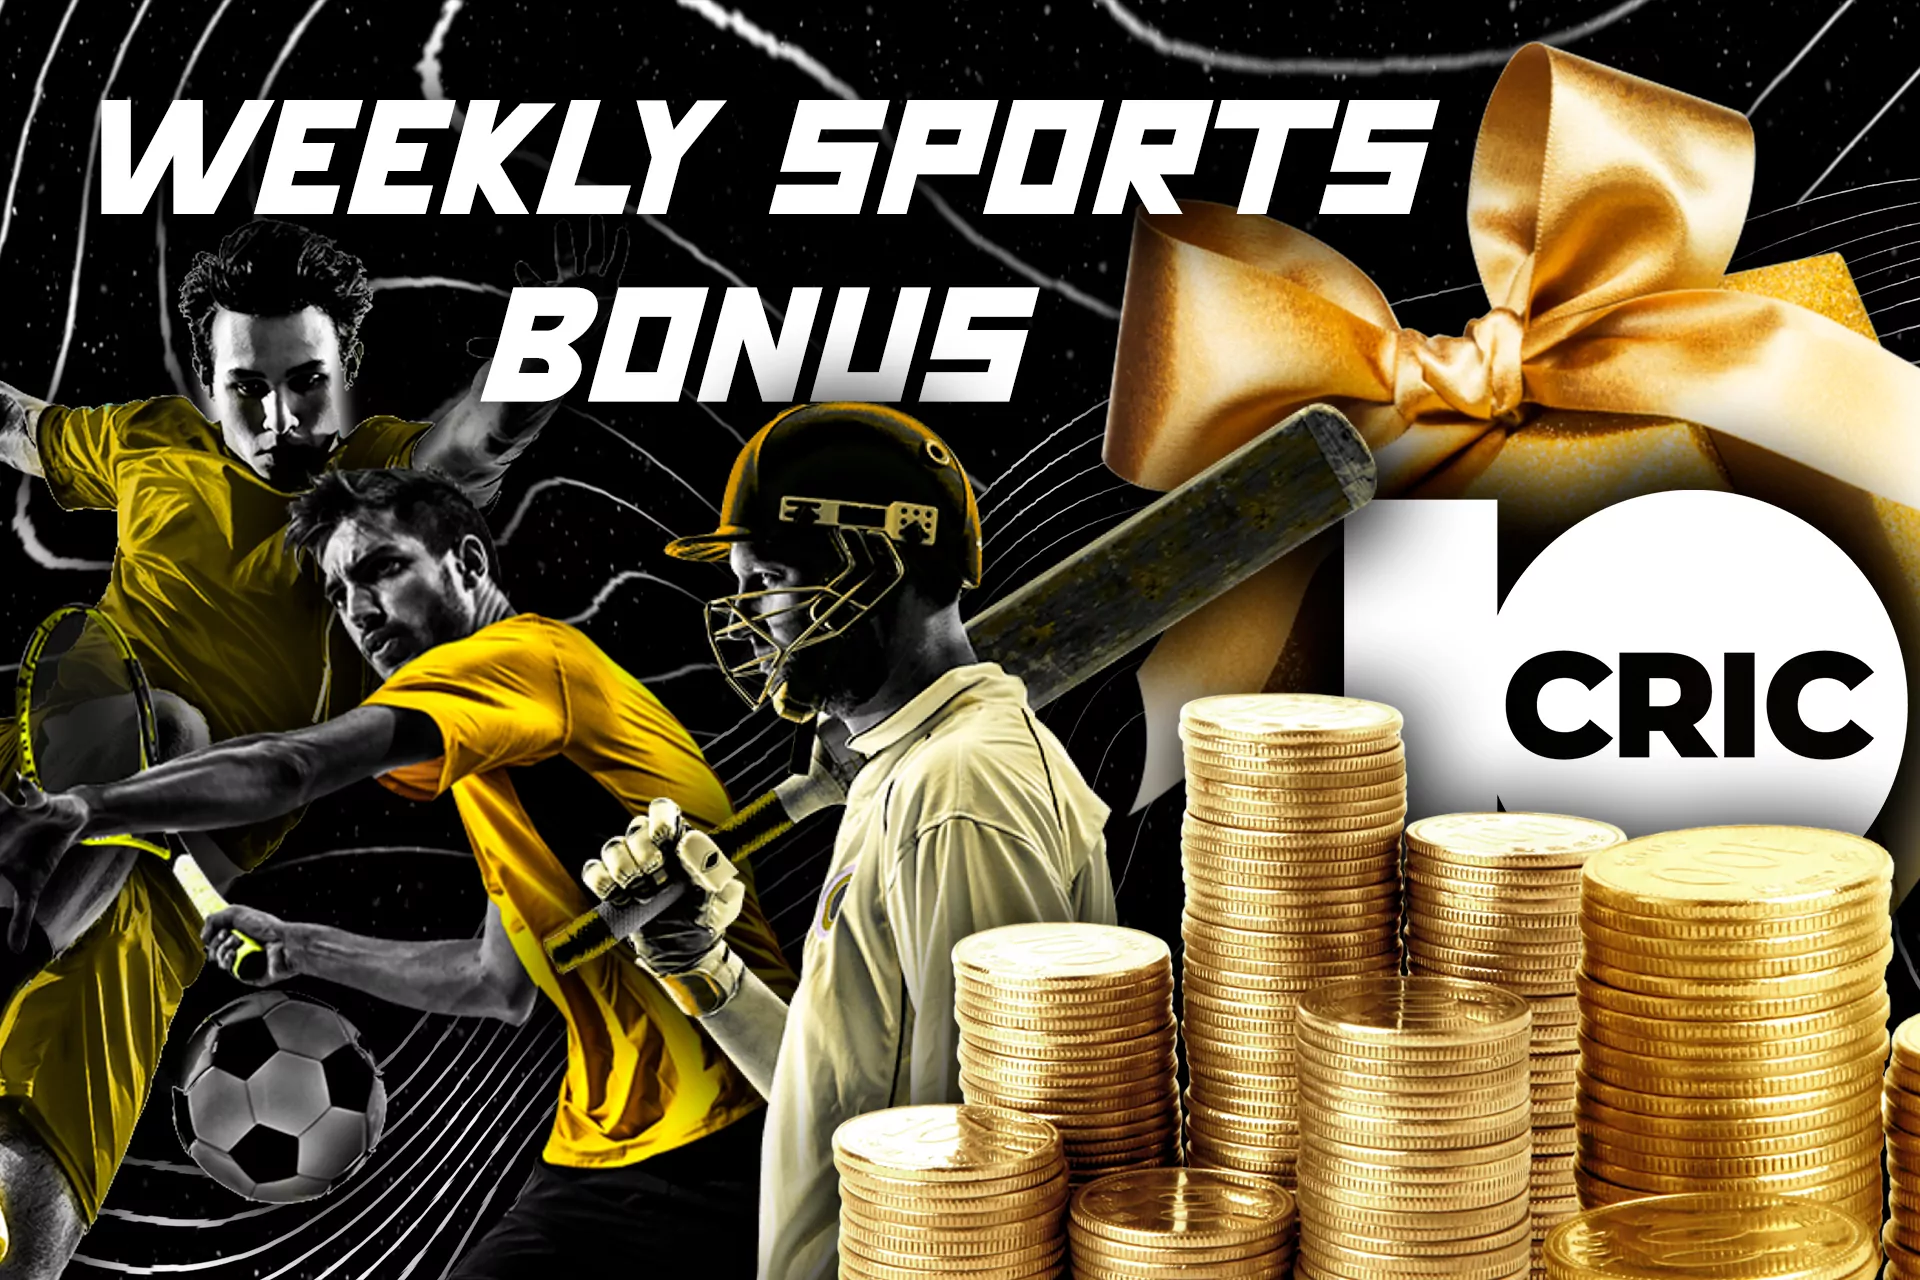 To get the Weekly Sports Bonus, you need to place a ₹2,500 combo bet in total.